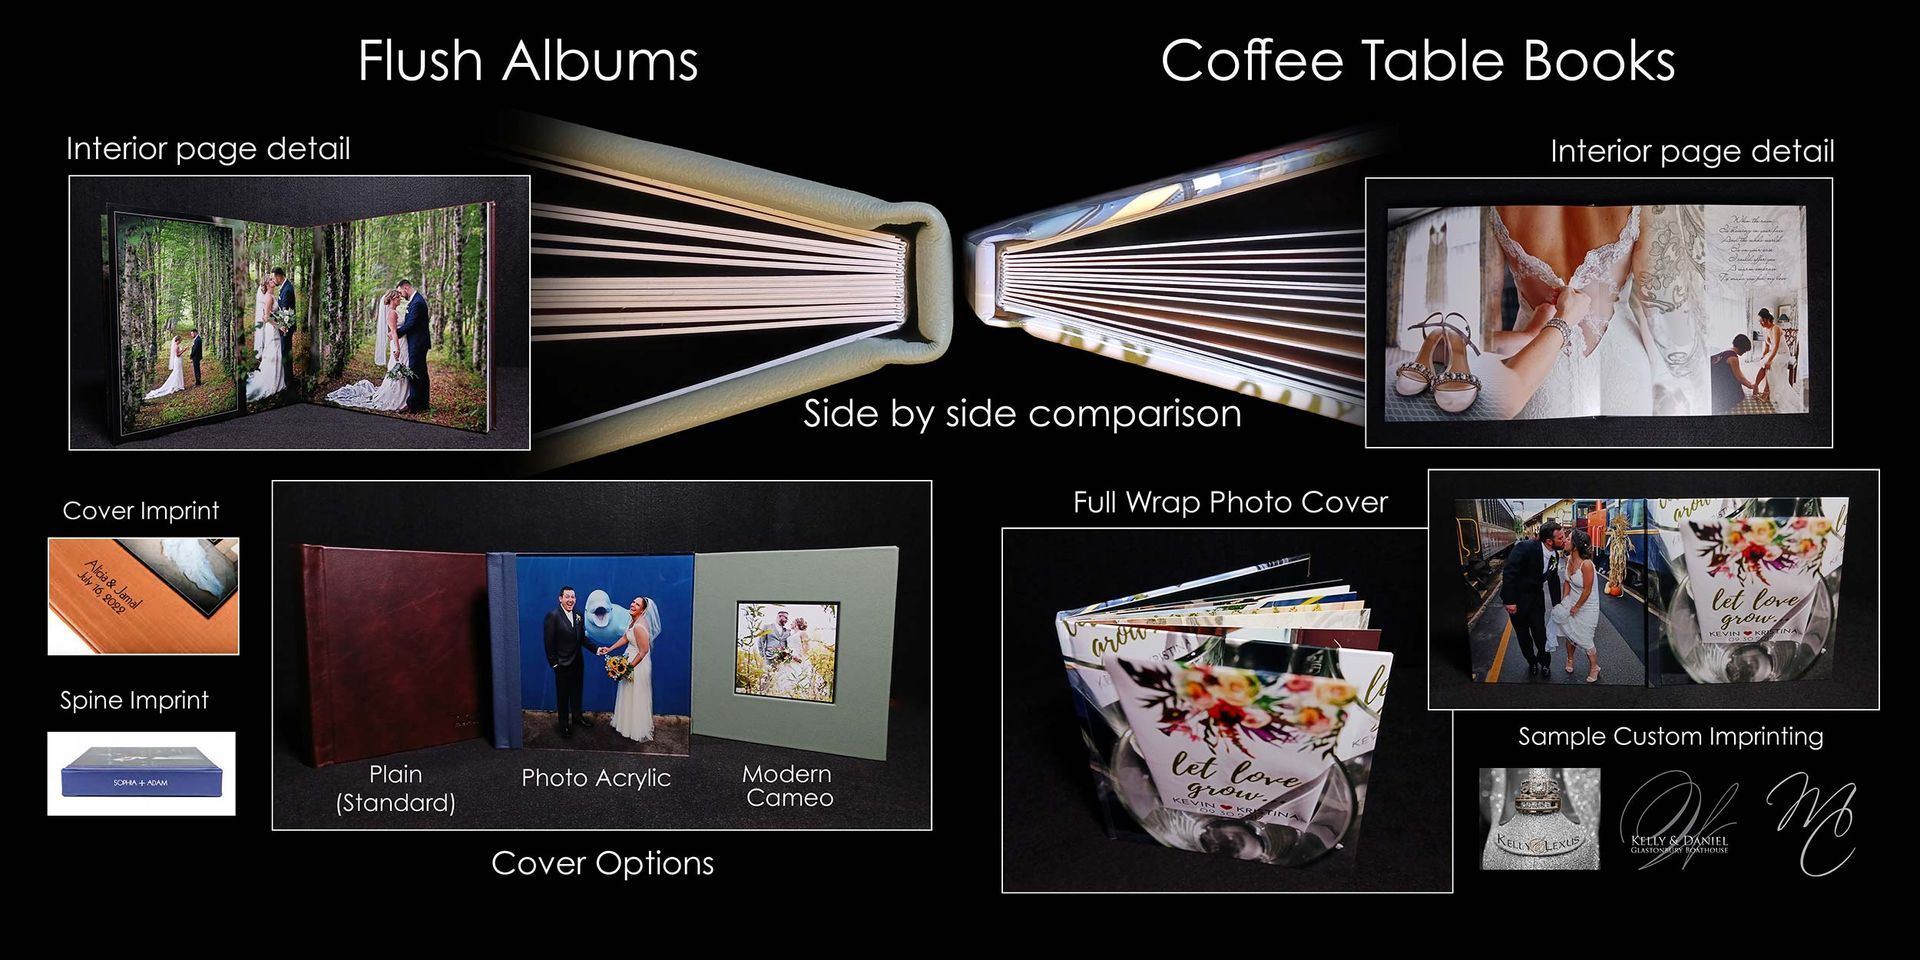 overview comparison of flush albums and coffee table books